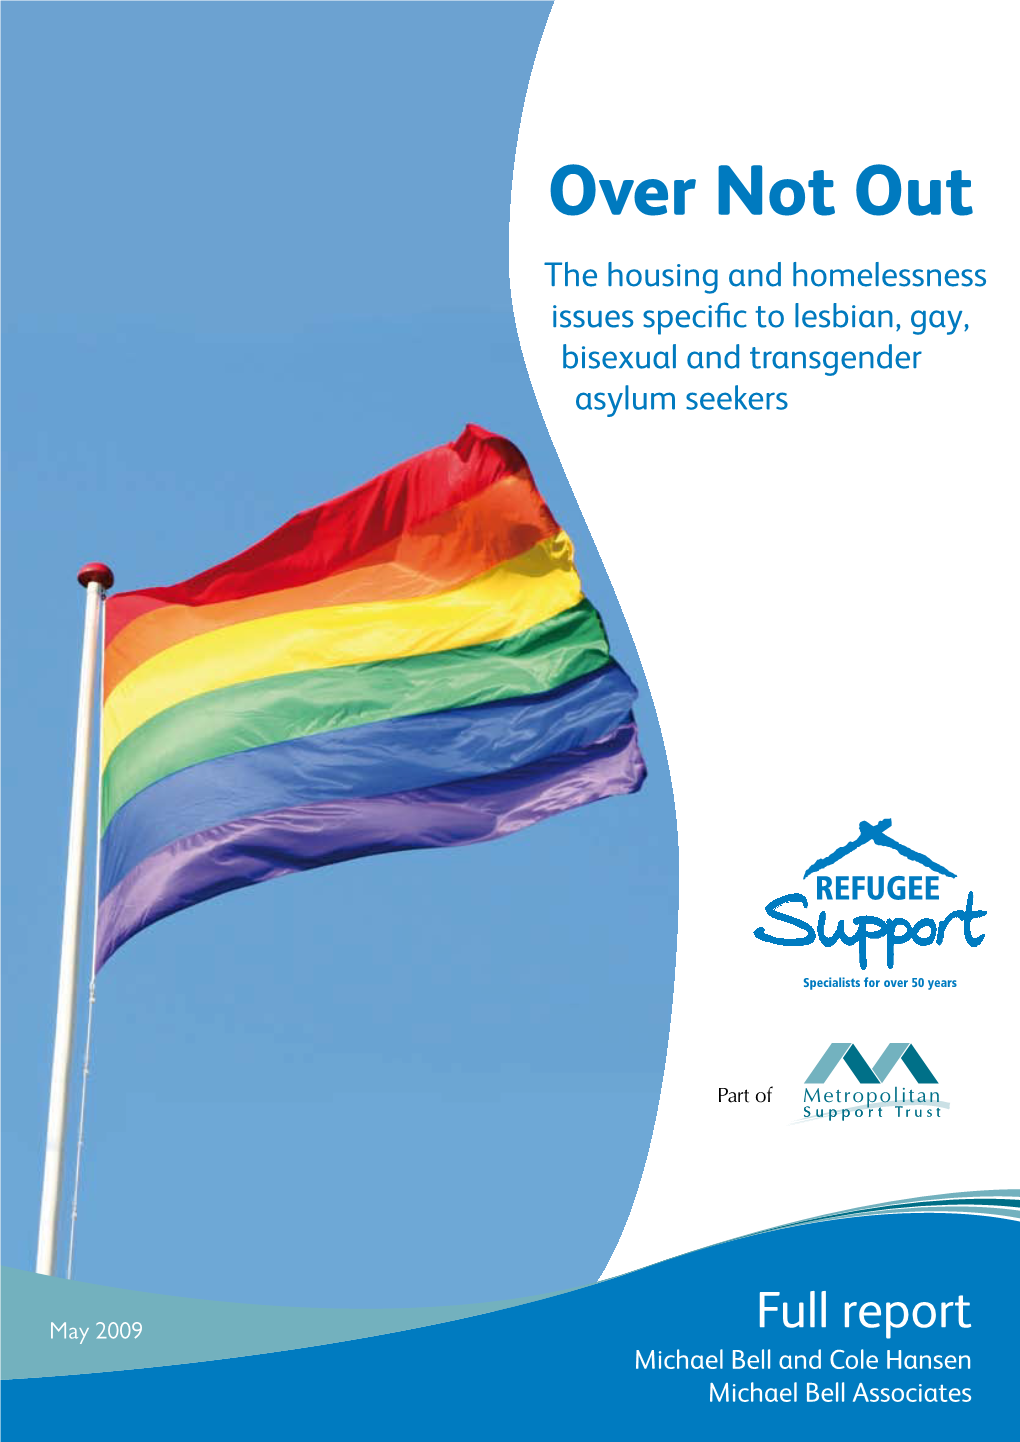 Over Not out the Housing and Homelessness Issues Specific to Lesbian, Gay, Bisexual and Transgender Asylum Seekers